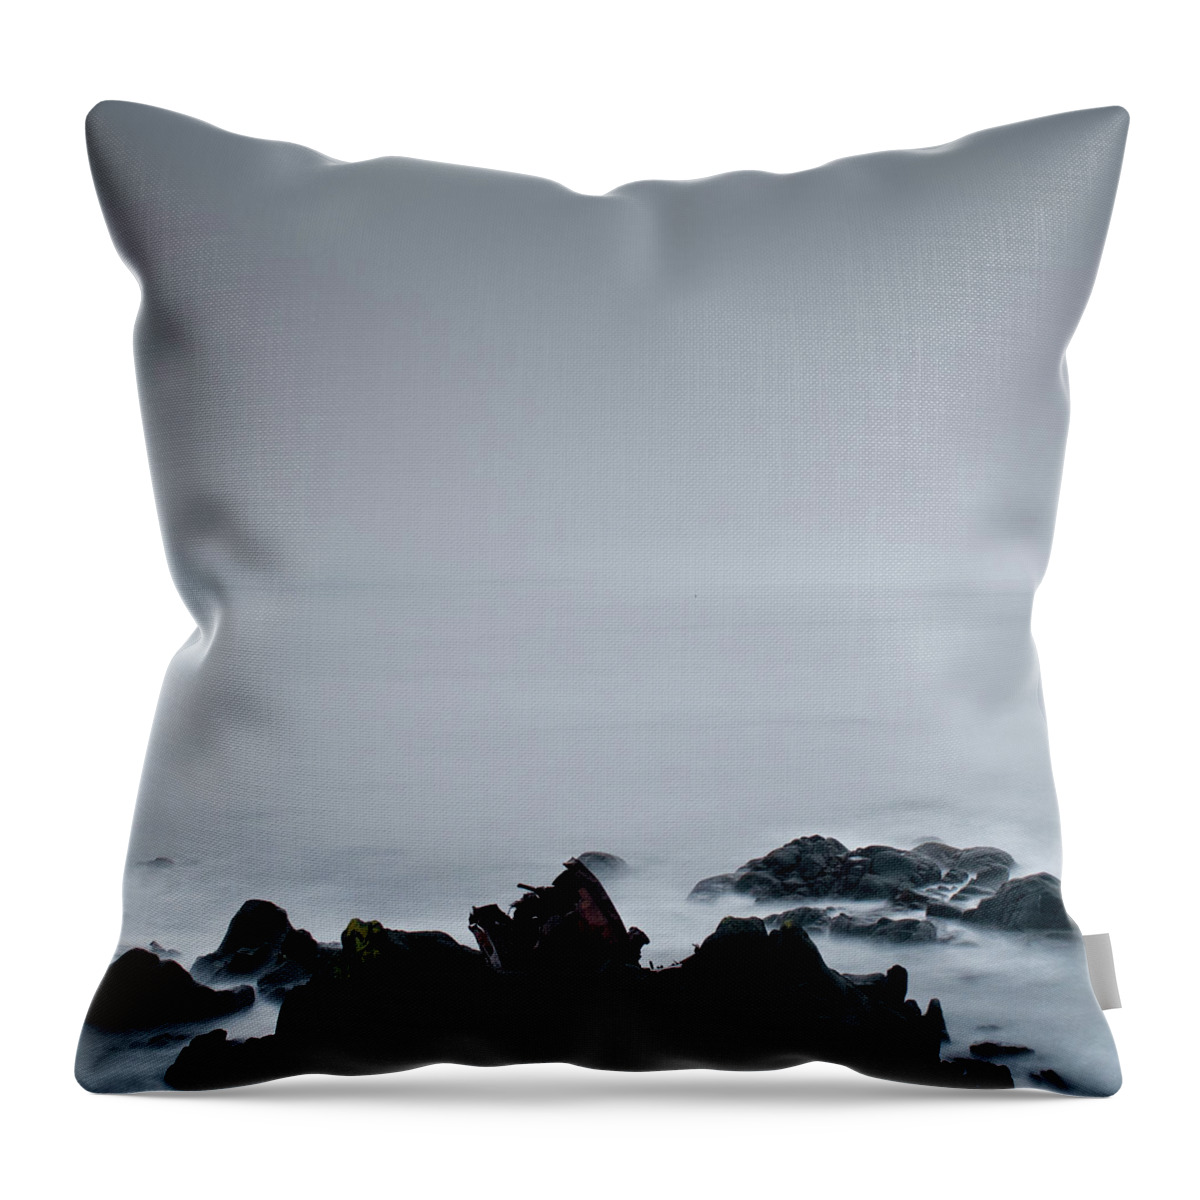 Hokkaido Throw Pillow featuring the photograph Rocks In Water At Sea by Ahfox21